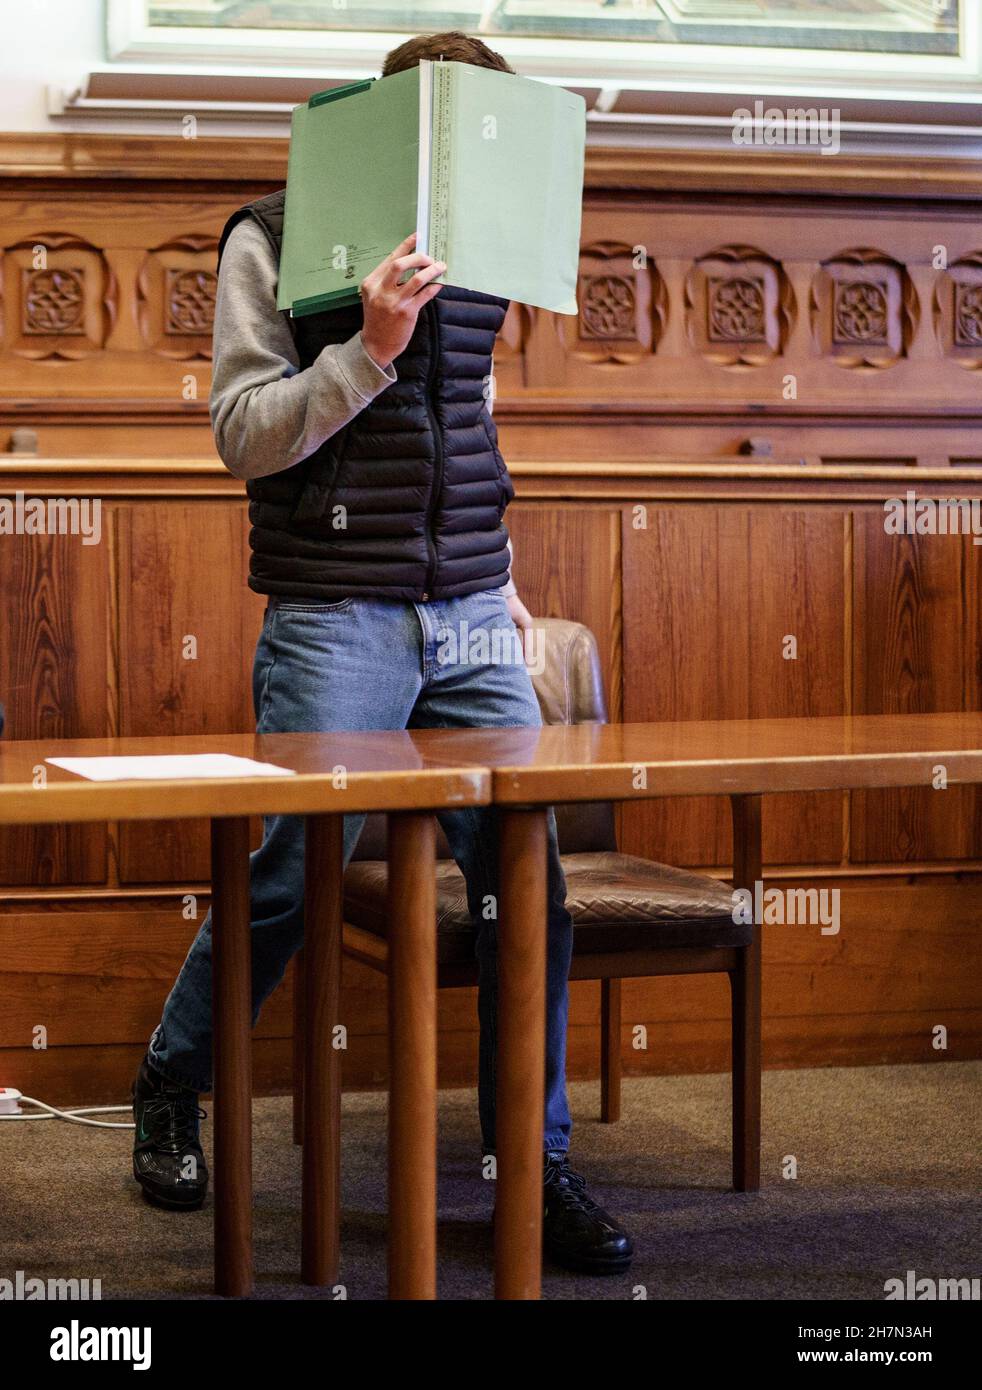 Flensburg, Germany. 24th Nov, 2021. The 20-year-old defendant in the manslaughter trial is waiting in the courtroom for the verdict to be announced. The young man is alleged to have stabbed a 16-year-old to death on 2 April 2021 after an argument on a viewing platform near the Duborgskolen in Flensburg. Credit: Axel Heimken/dpa/Alamy Live News Stock Photo